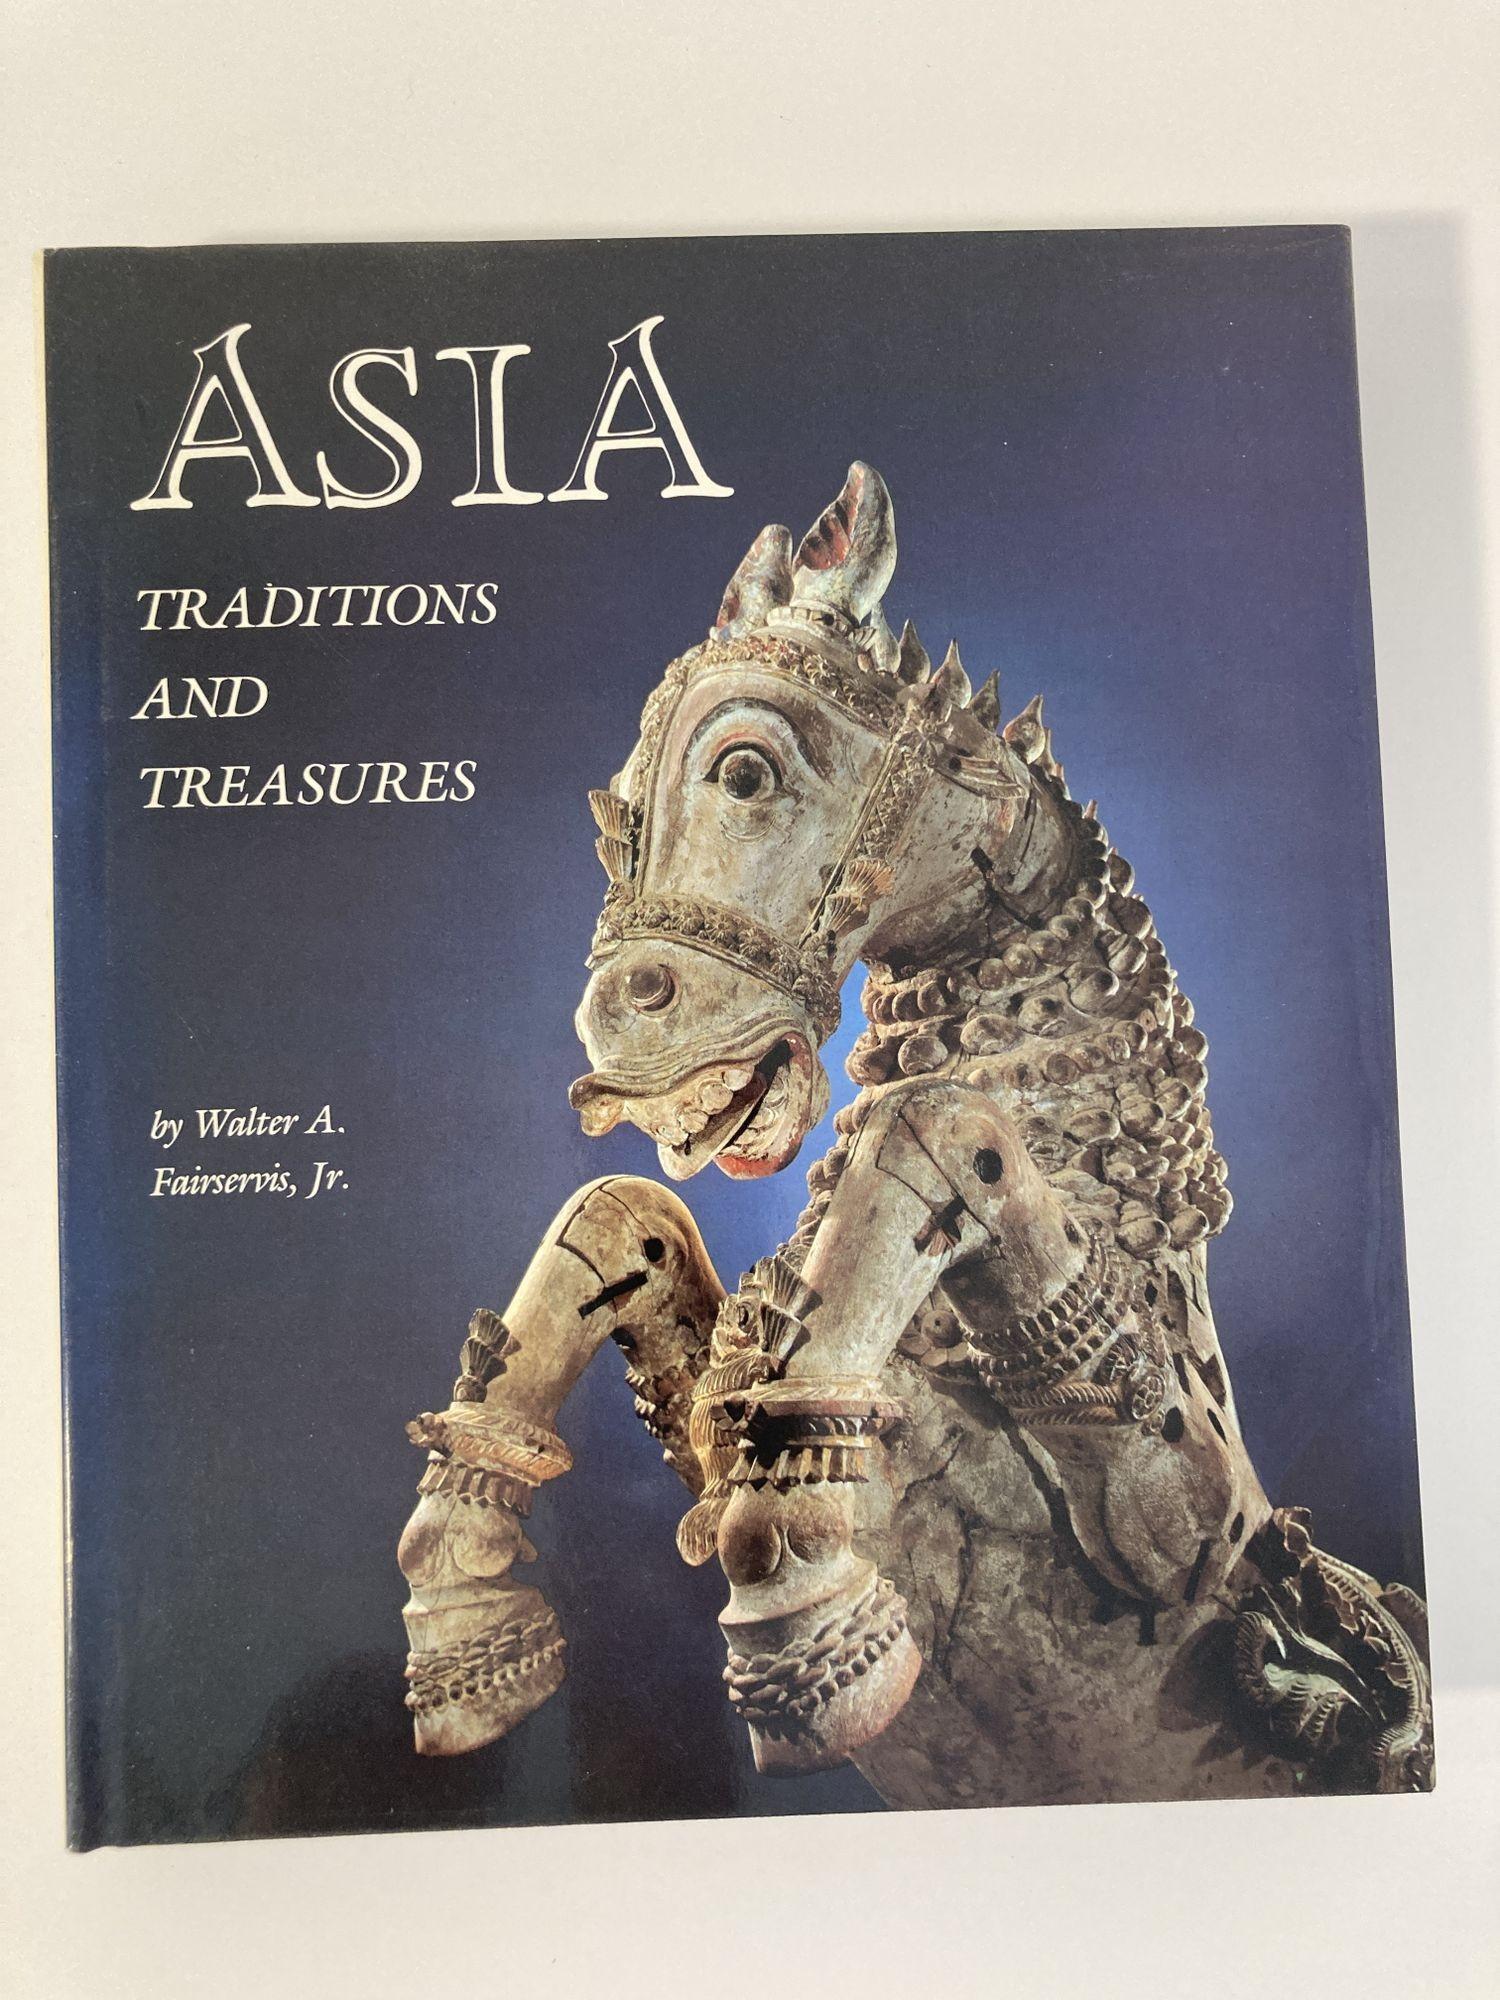 Asia, Traditions and Treasures by Fairservis Walter A. Hardcover Book 1st Edition 1981
H.N. Abrams in collaboration with the American Museum of Natural History, 1981 - 256 pages Art.

Asia, Traditions and Treasures / by Walter A. Fairservis, Jr.